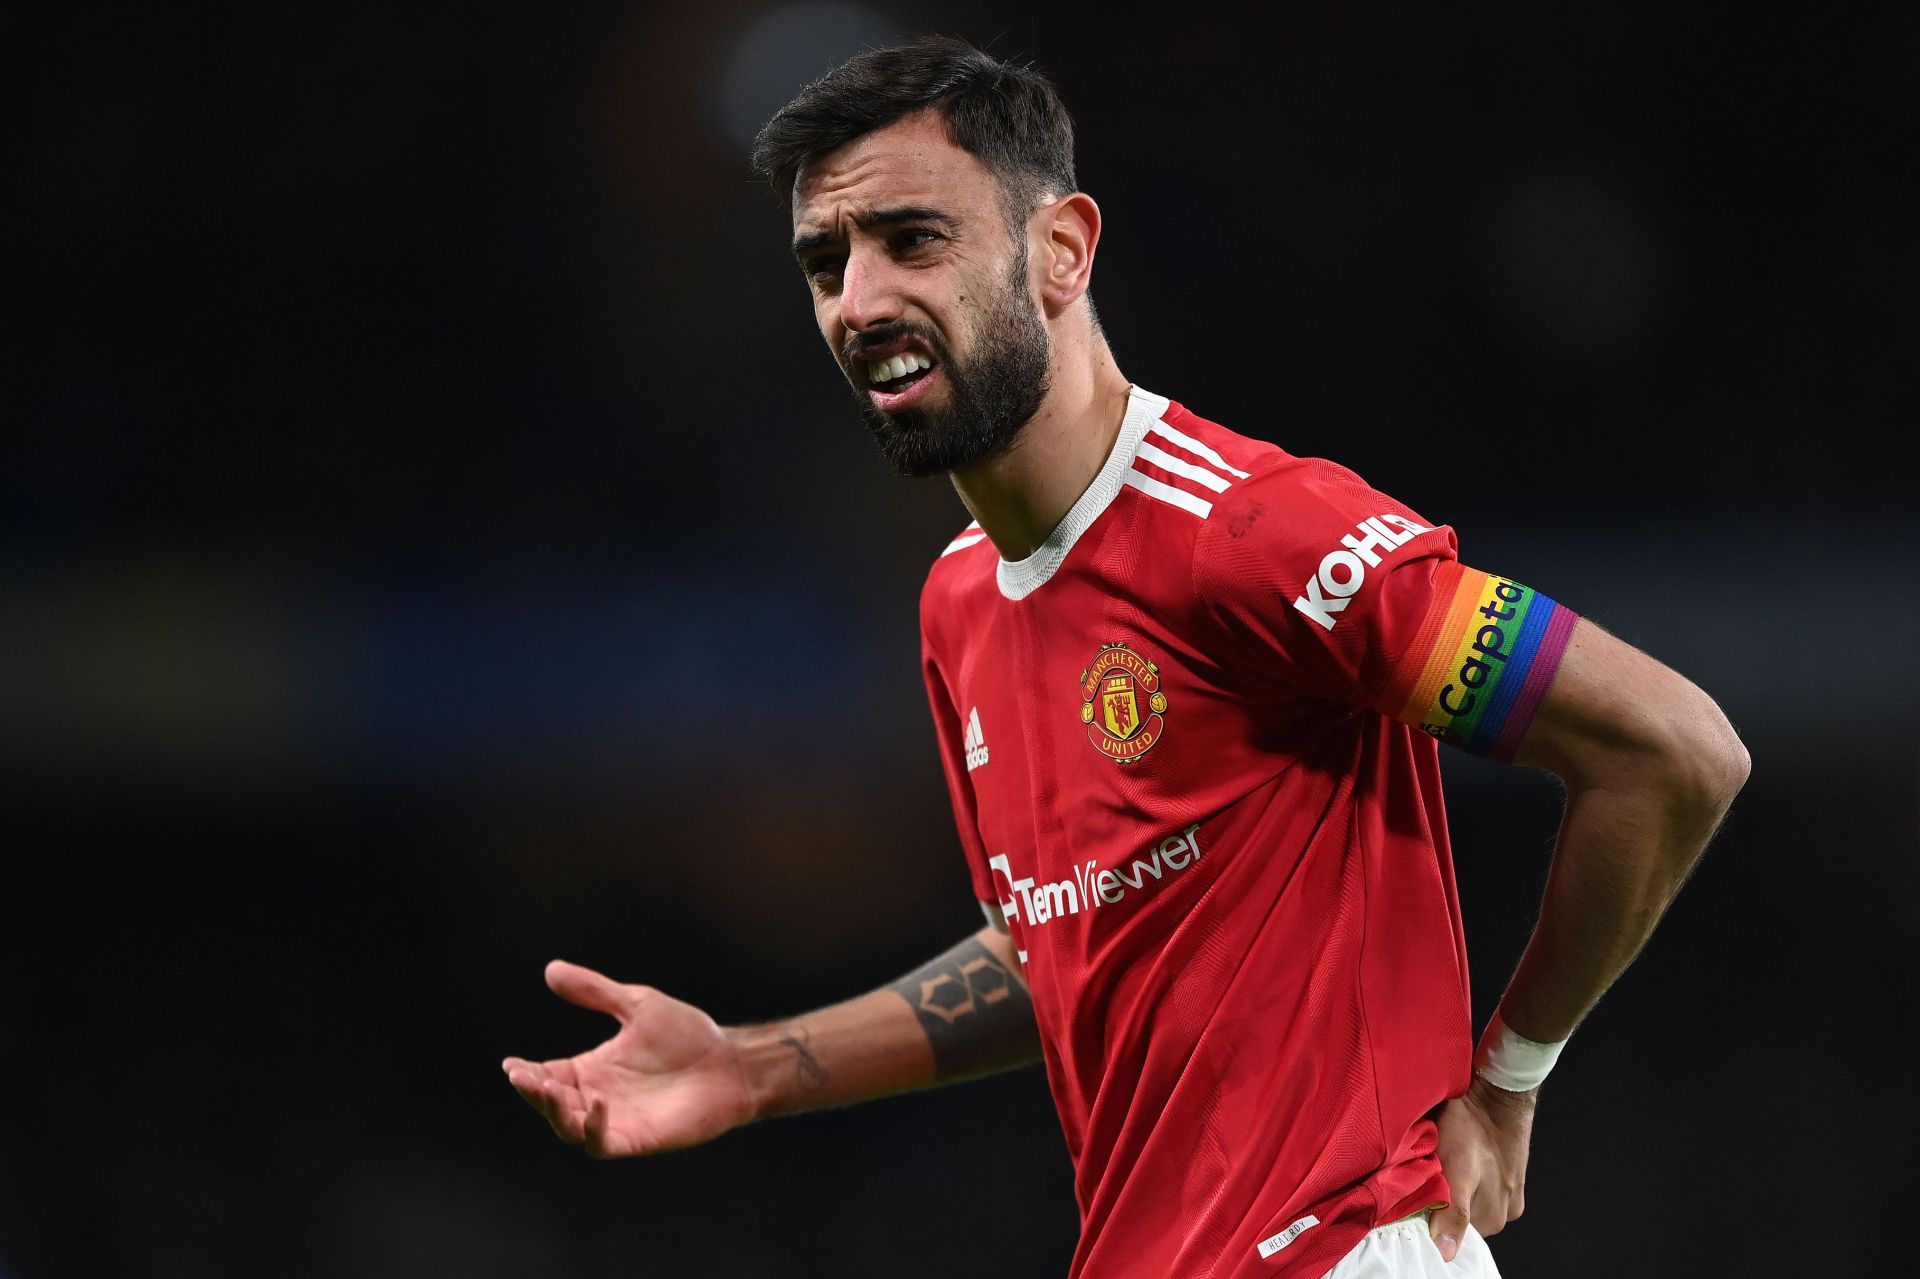 Bruno Fernandes has had the honor of captaining Manchester United